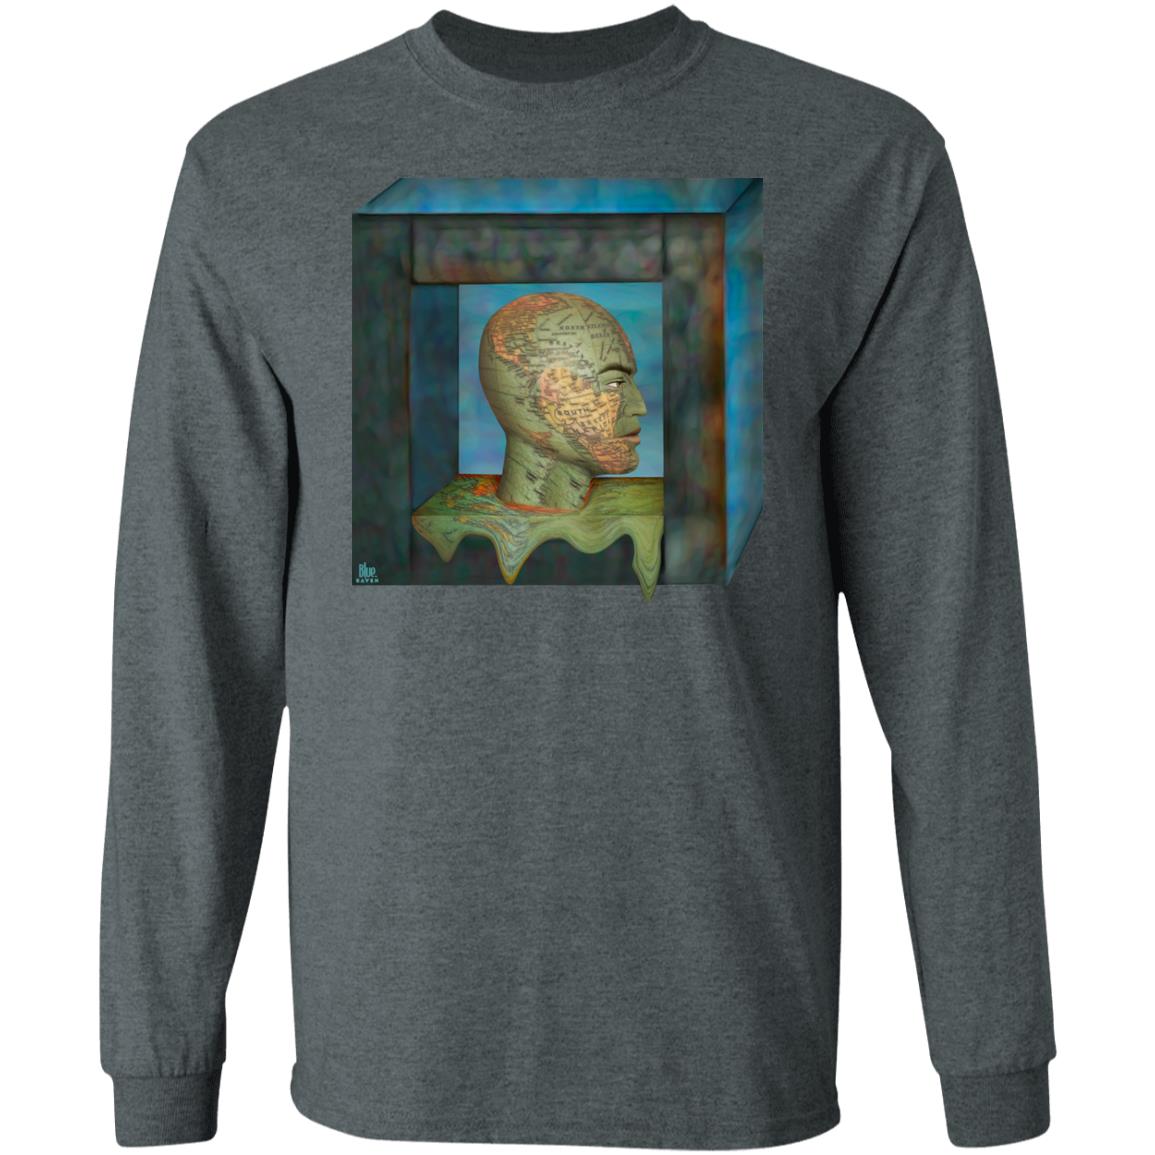 Boxed In - Men's Long Sleeve T-Shirt